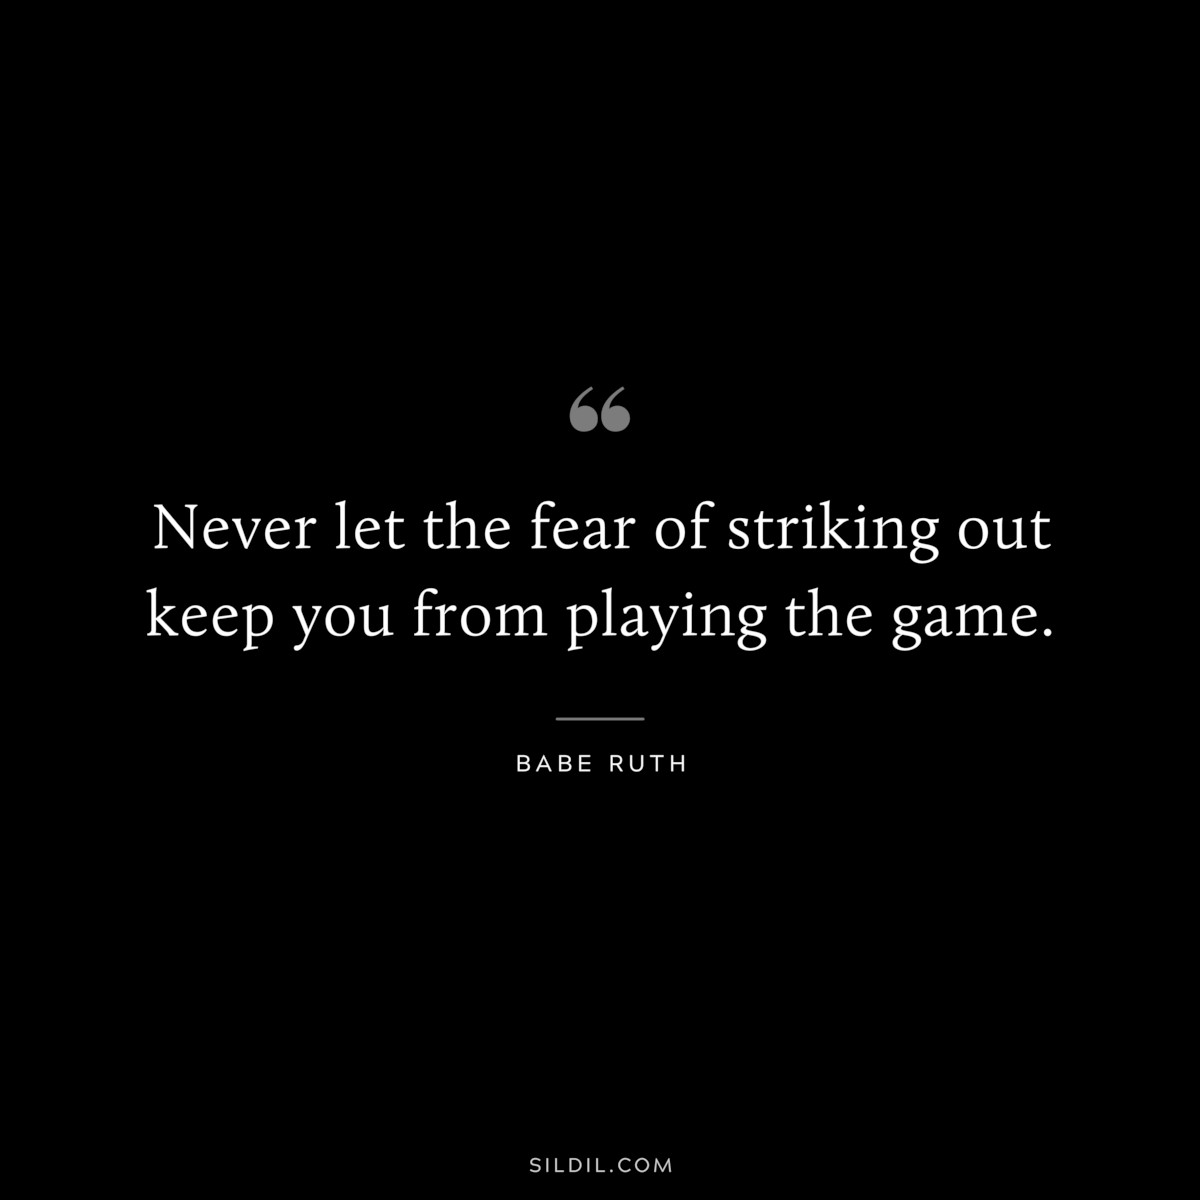 Never let the fear of striking out keep you from playing the game. ― Babe Ruth